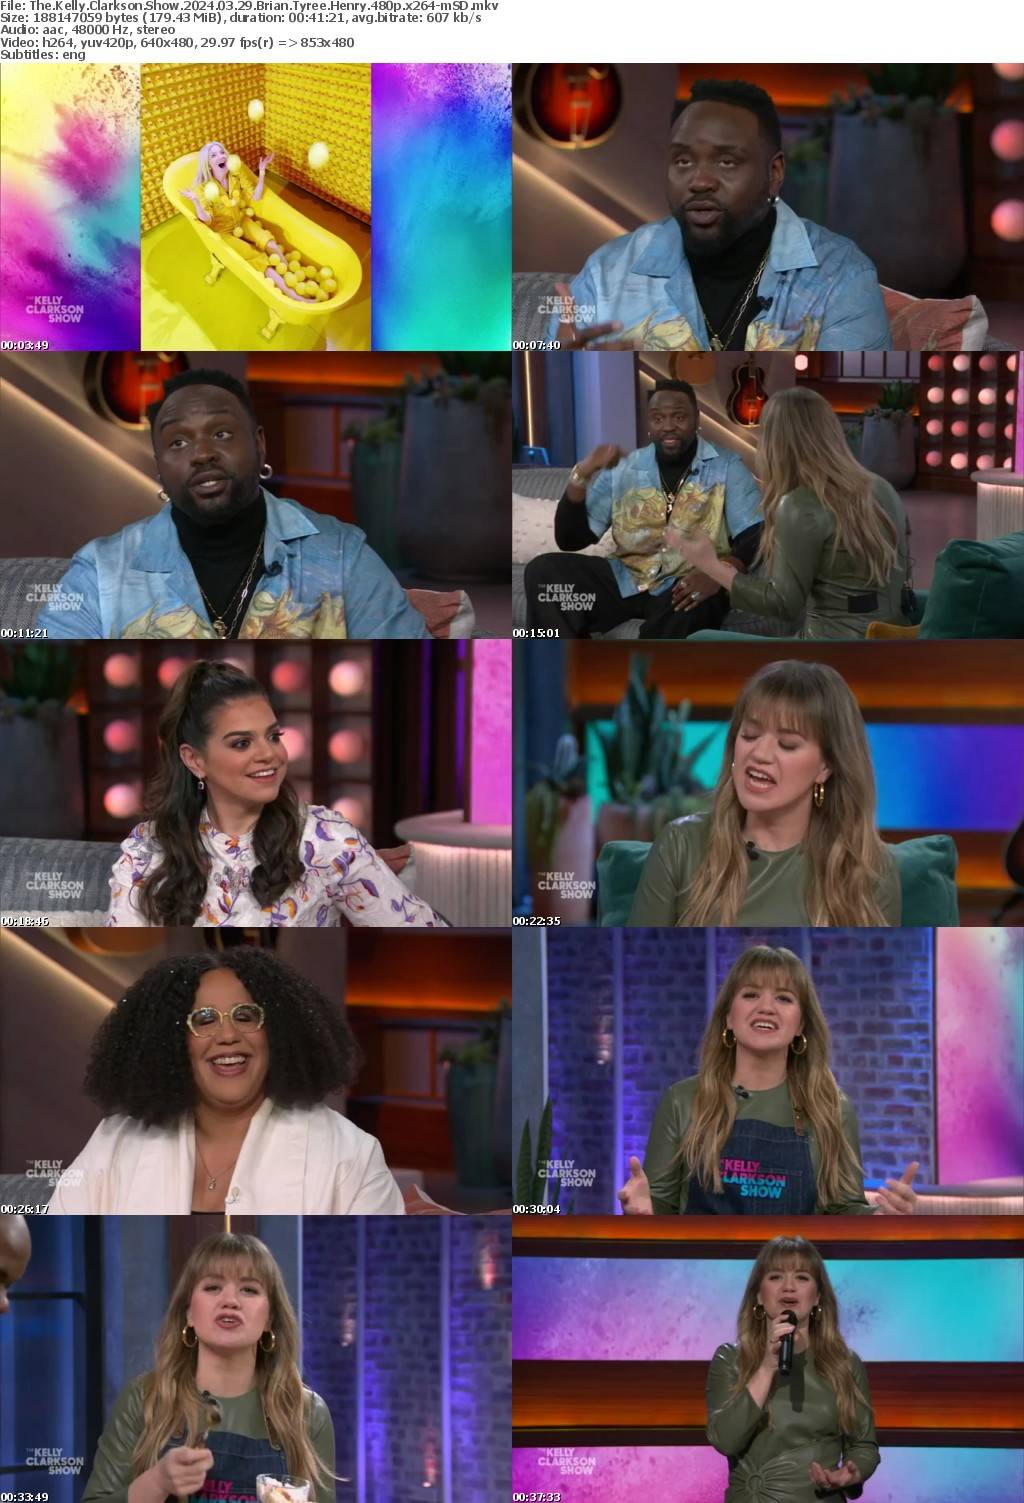 The Kelly Clarkson Show 2024 03 29 Brian Tyree Henry 480p x264-mSD